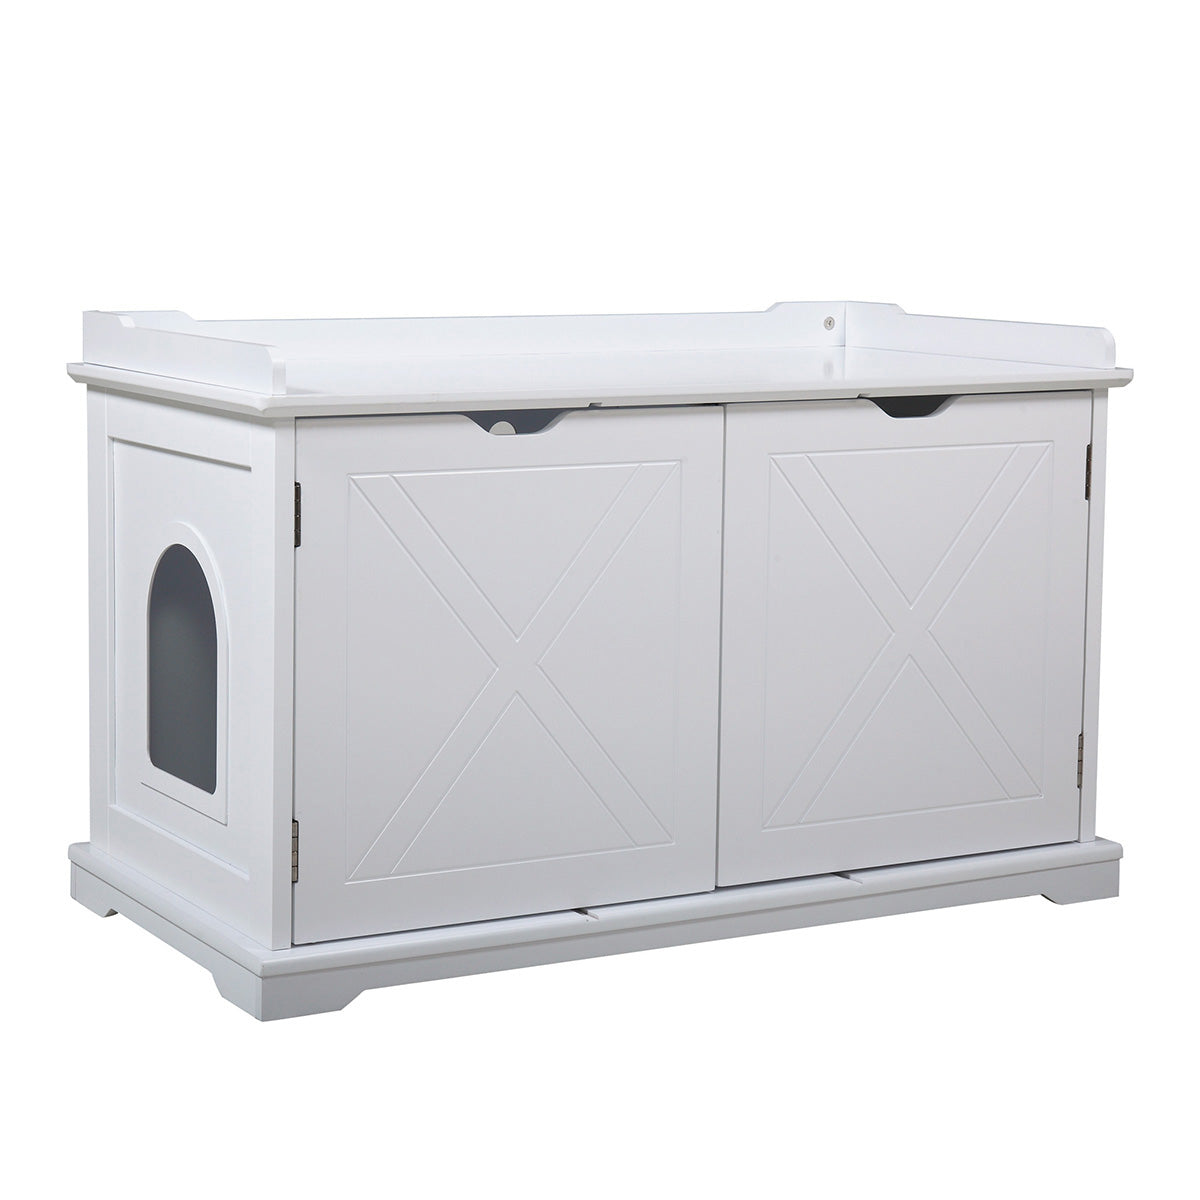 SESSLIFE Cat Hidden Litter Box, 2 in 1 Cat House Furniture and Side Table, 37.3" Large Litter Box Enclosure, White, TE2169